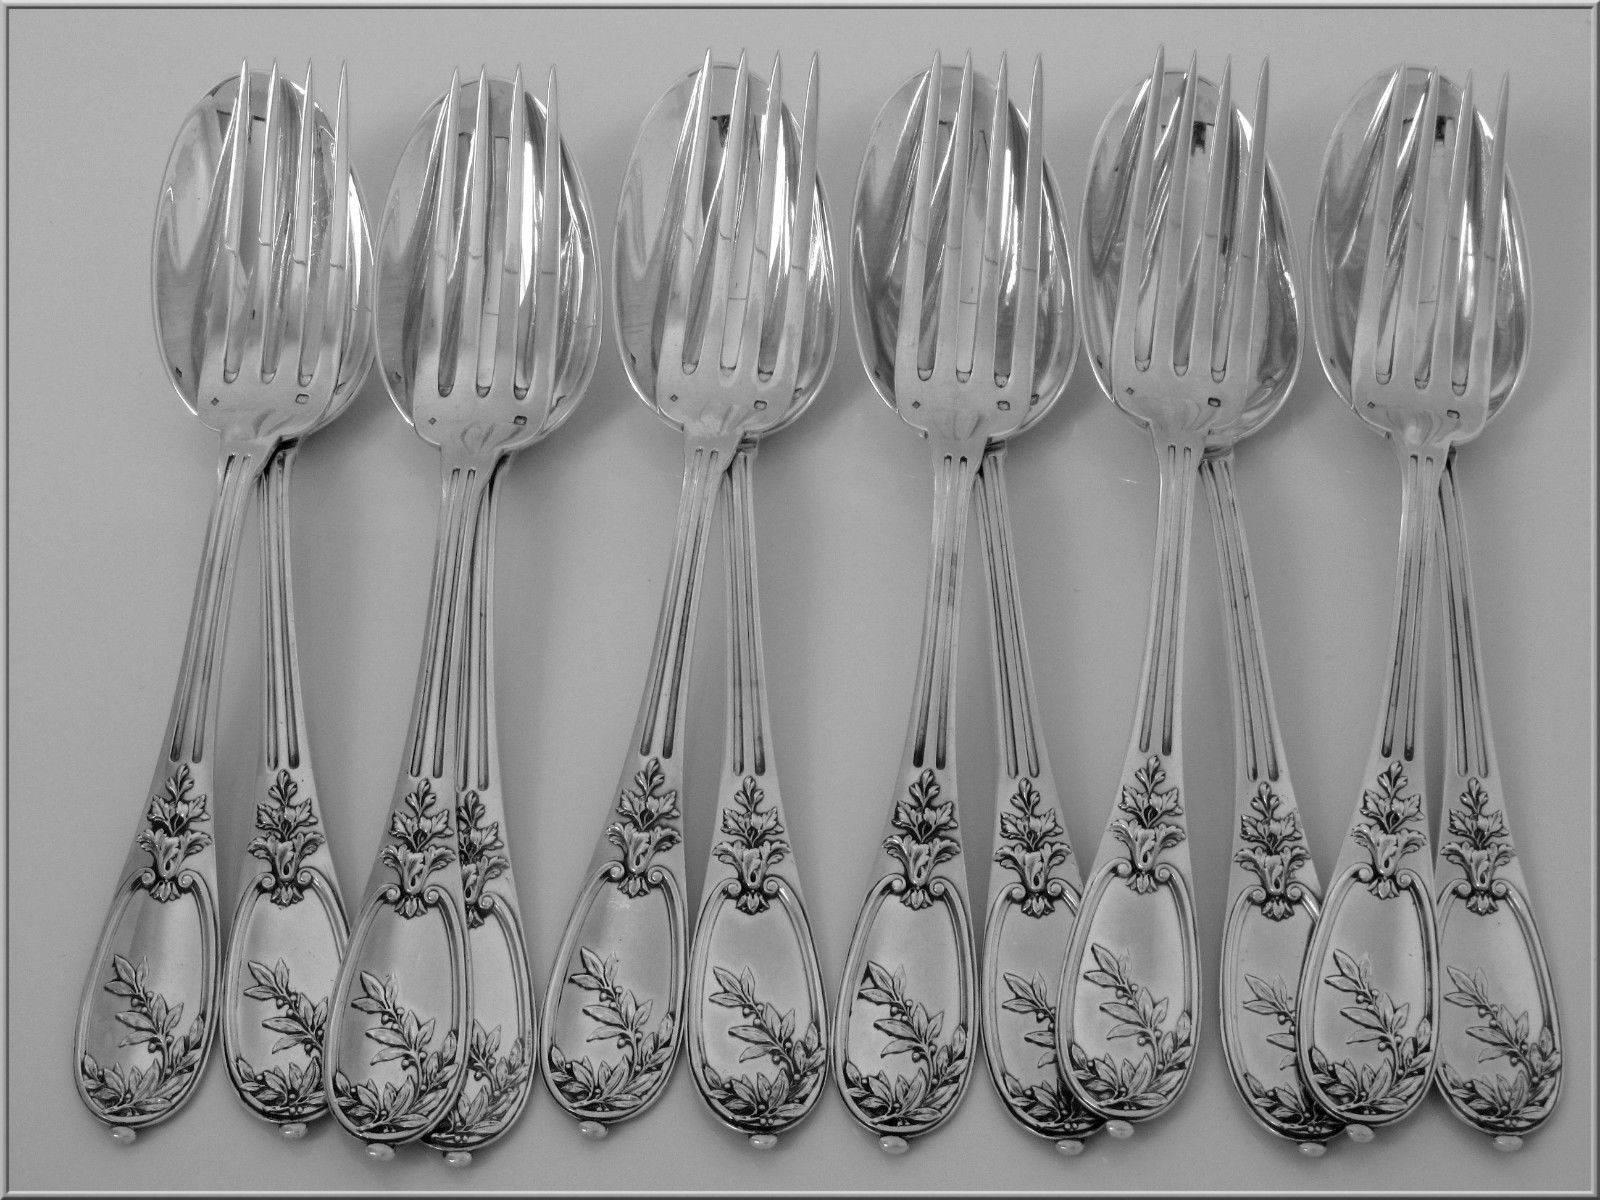 Late 19th Century Henin French Sterling Silver Dinner Flatware Set of 12 Pieces, Neoclassical